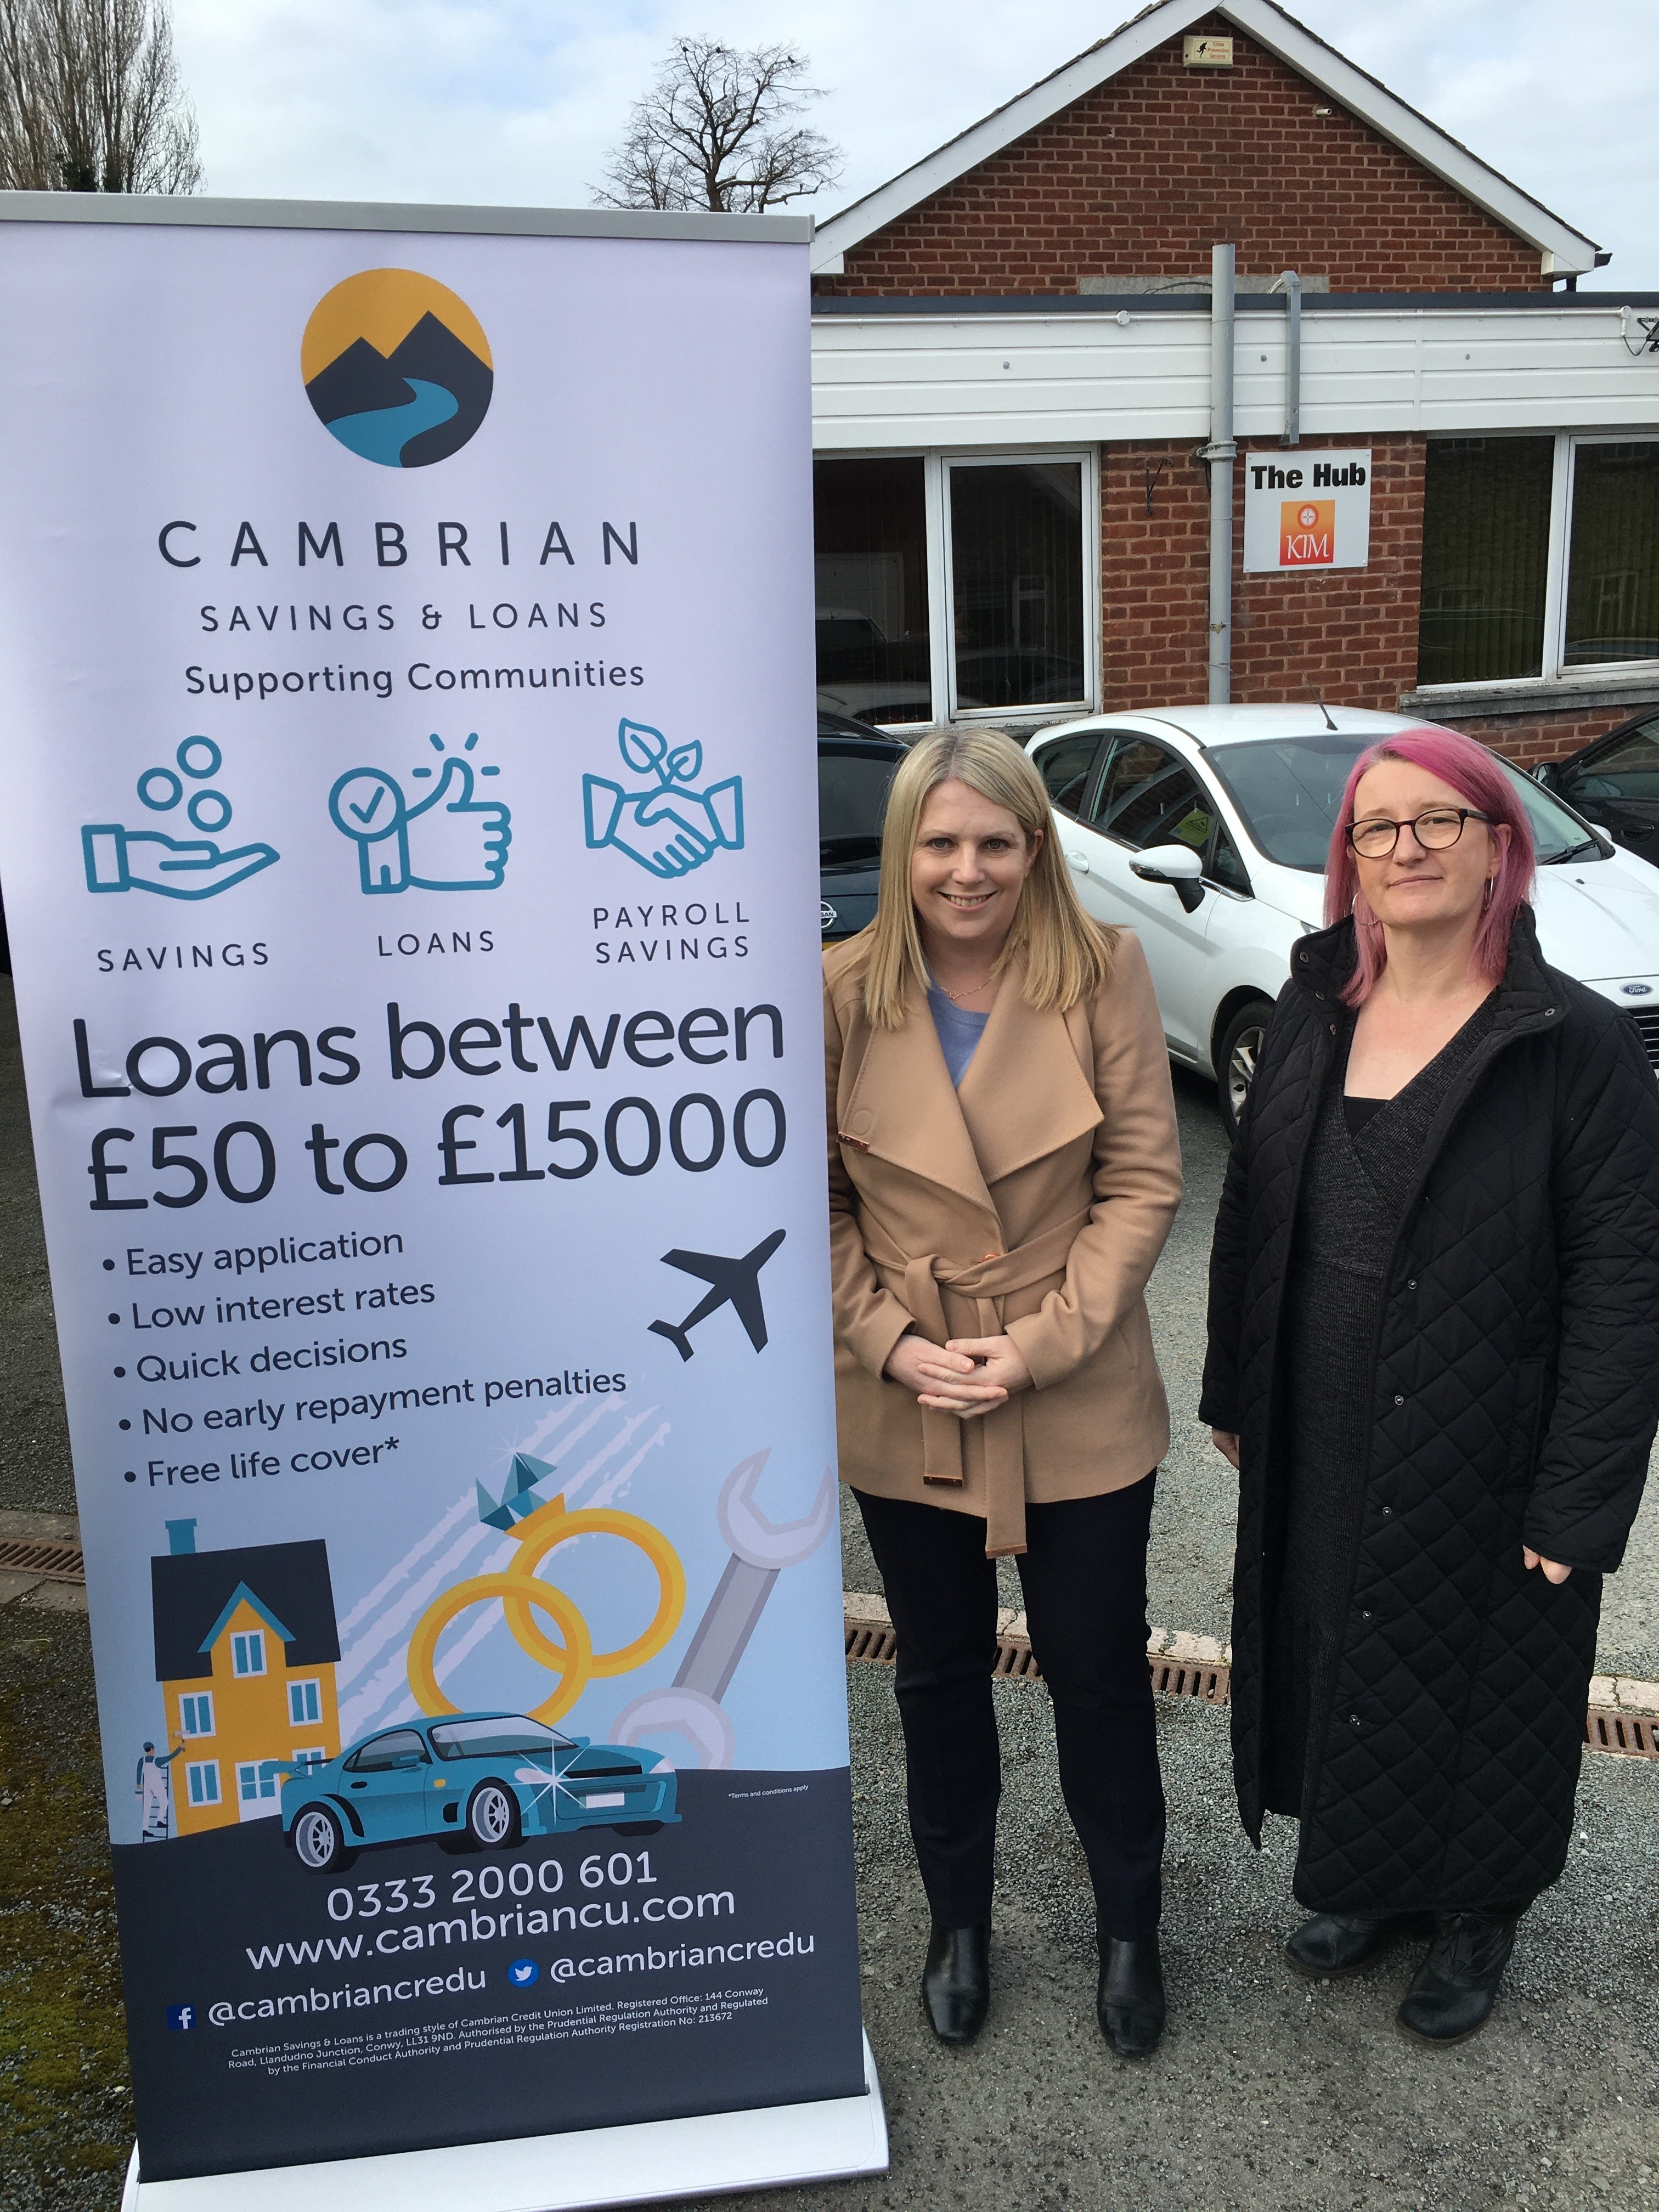 Expanding Welsh credit union launches new Flintshire office to bring services closer to the community